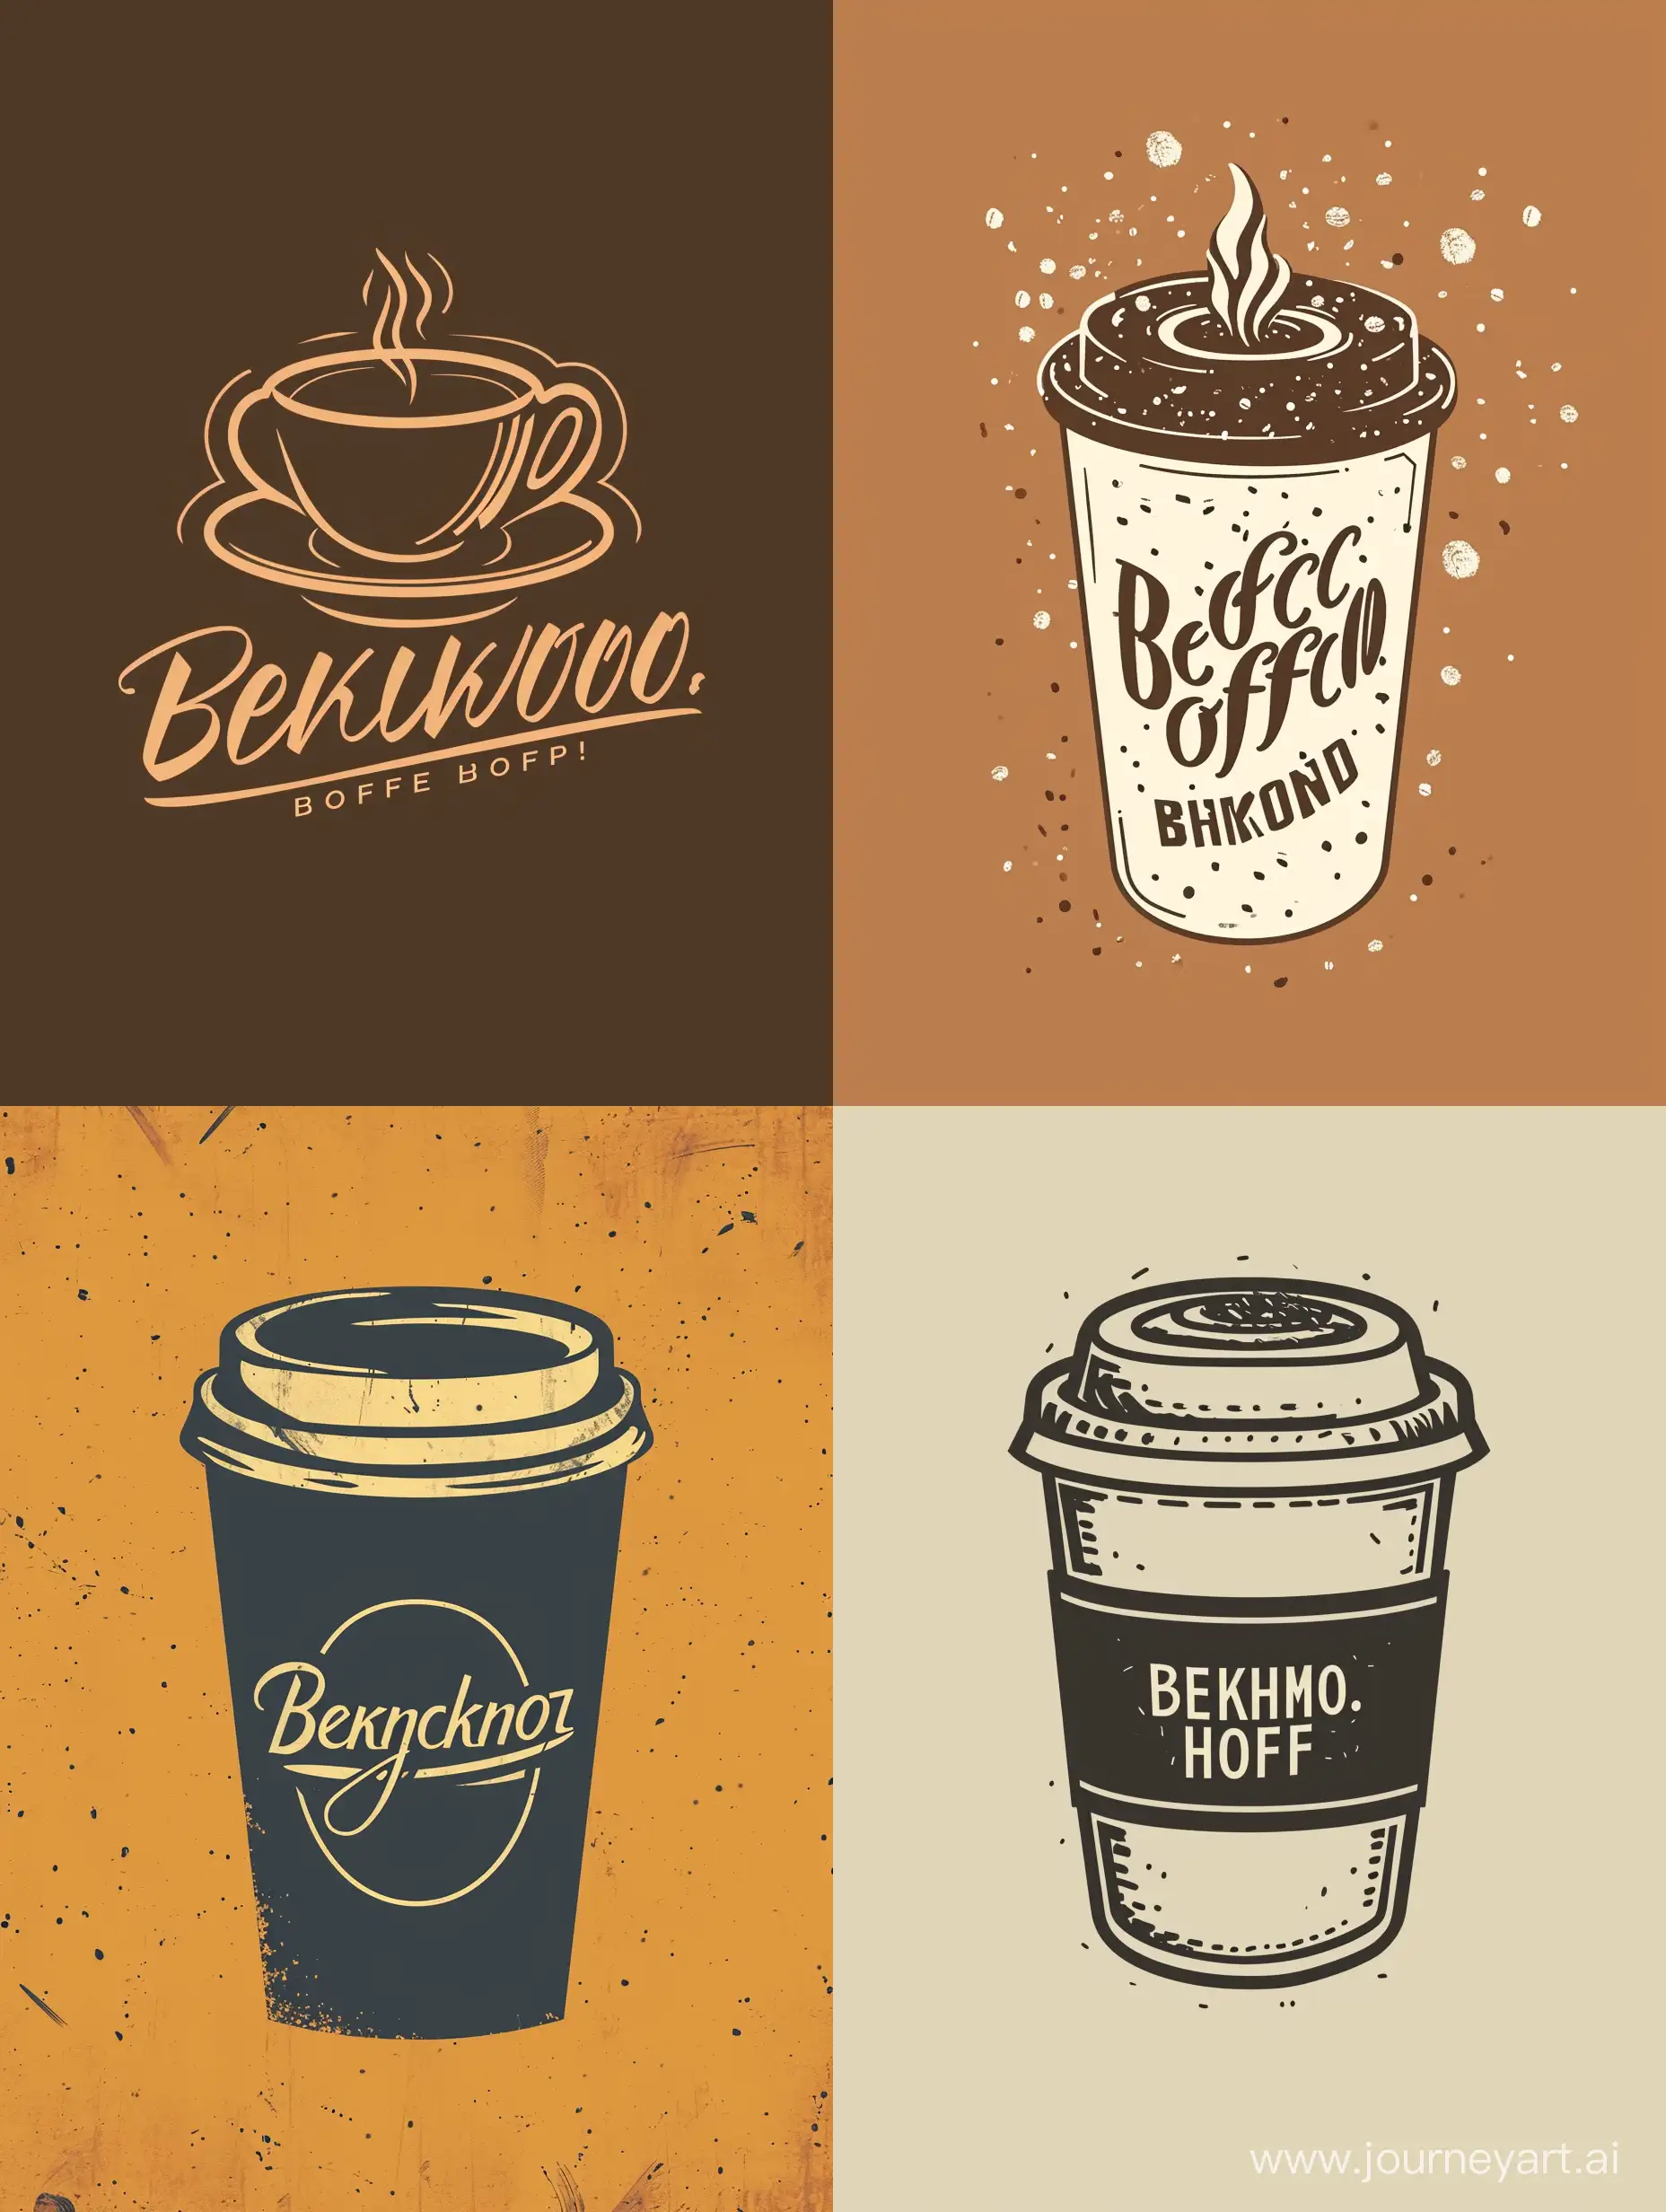 A special logo for a coffee shop with Beckham's name